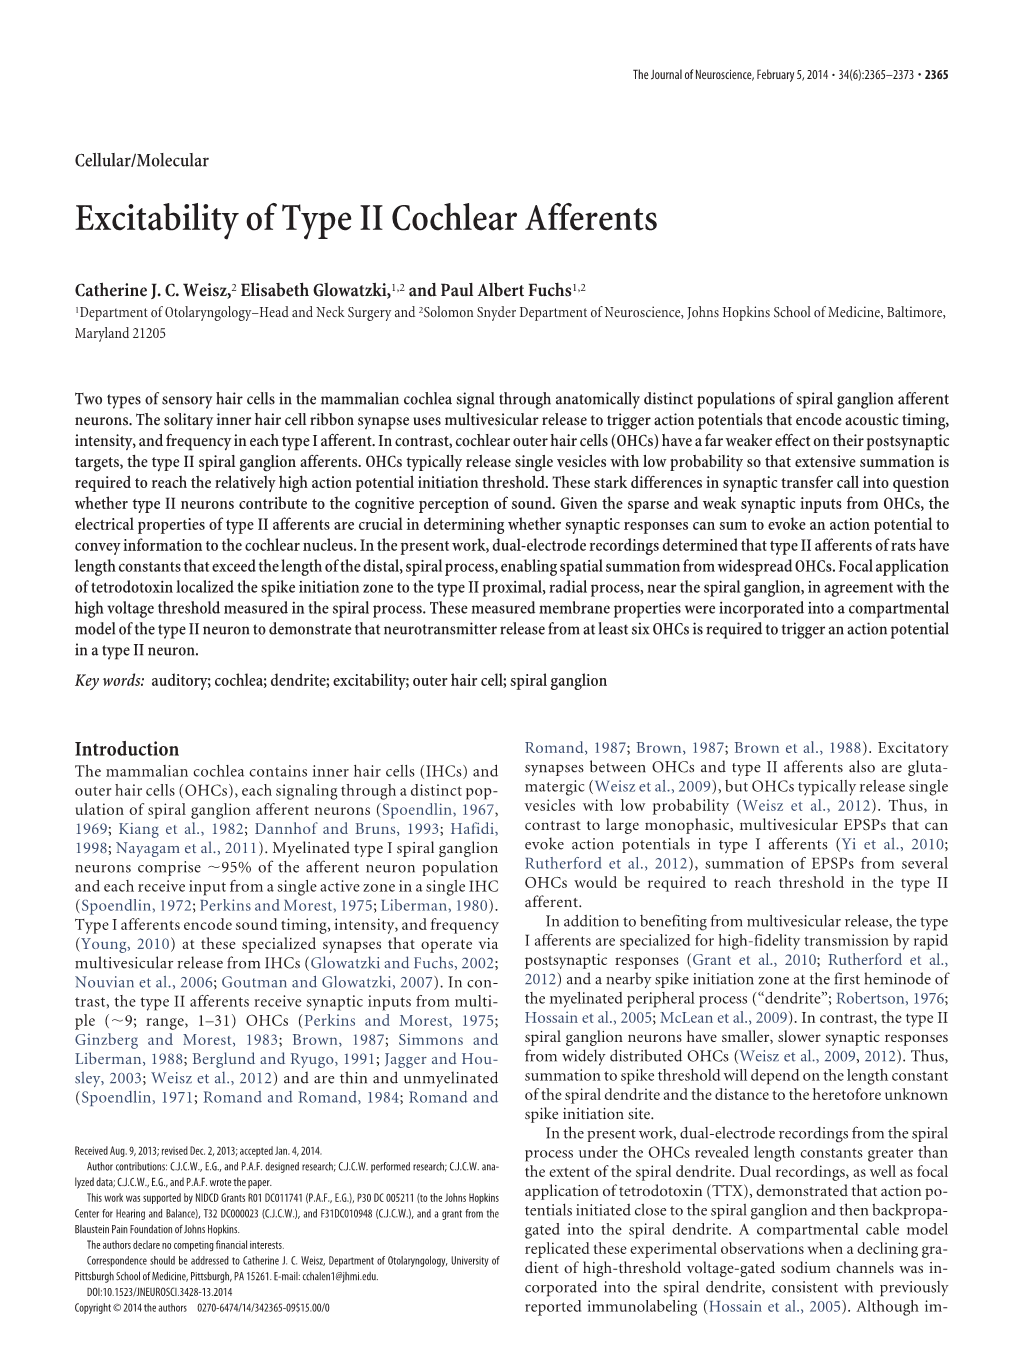 Excitability of Type II Cochlear Afferents